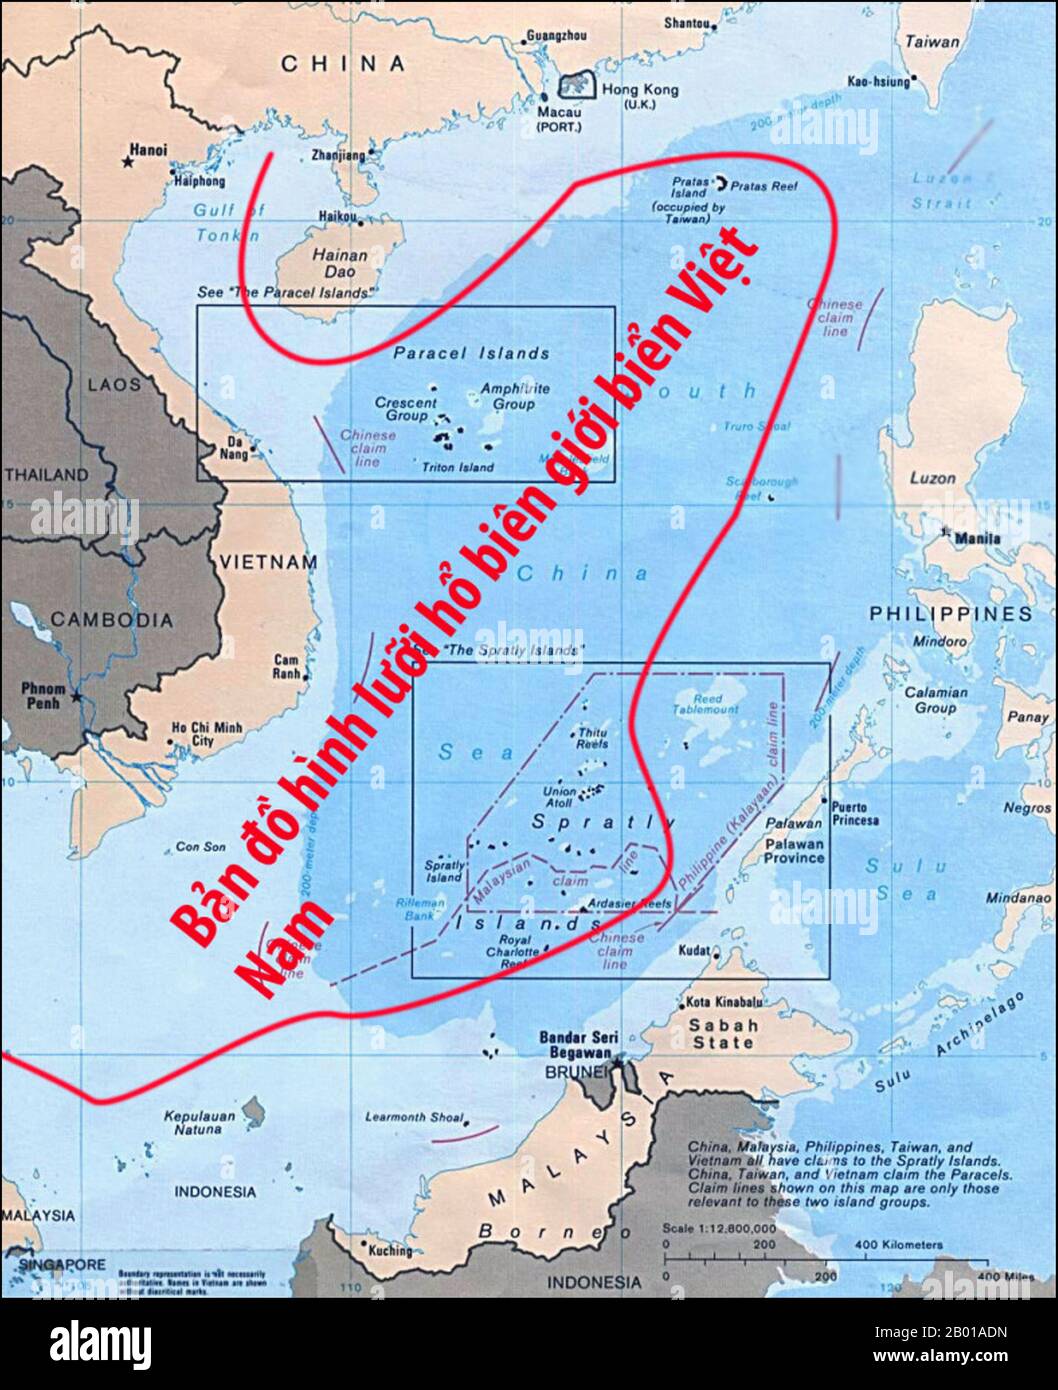 South China Sea: Map of the disputed Paracels Islands and Spratly Islands detailing the Vietnamese claim.  The Spratlys Archipelago in the South China Sea (called by Vietnam the East Sea) is disputed in various degrees by China, Taiwan, Vietnam, Philippines, Malaysia and Brunei. The Paracels Islands are disputed between China and Vietnam, but have been controlled completely by China since 1974.  The Chinese claim is the most extensive and is generally indicated by a notional frontier termed by the Chinese the 'Nine Dotted Line' (nánhǎi jiǔduàn xiàn). Stock Photo